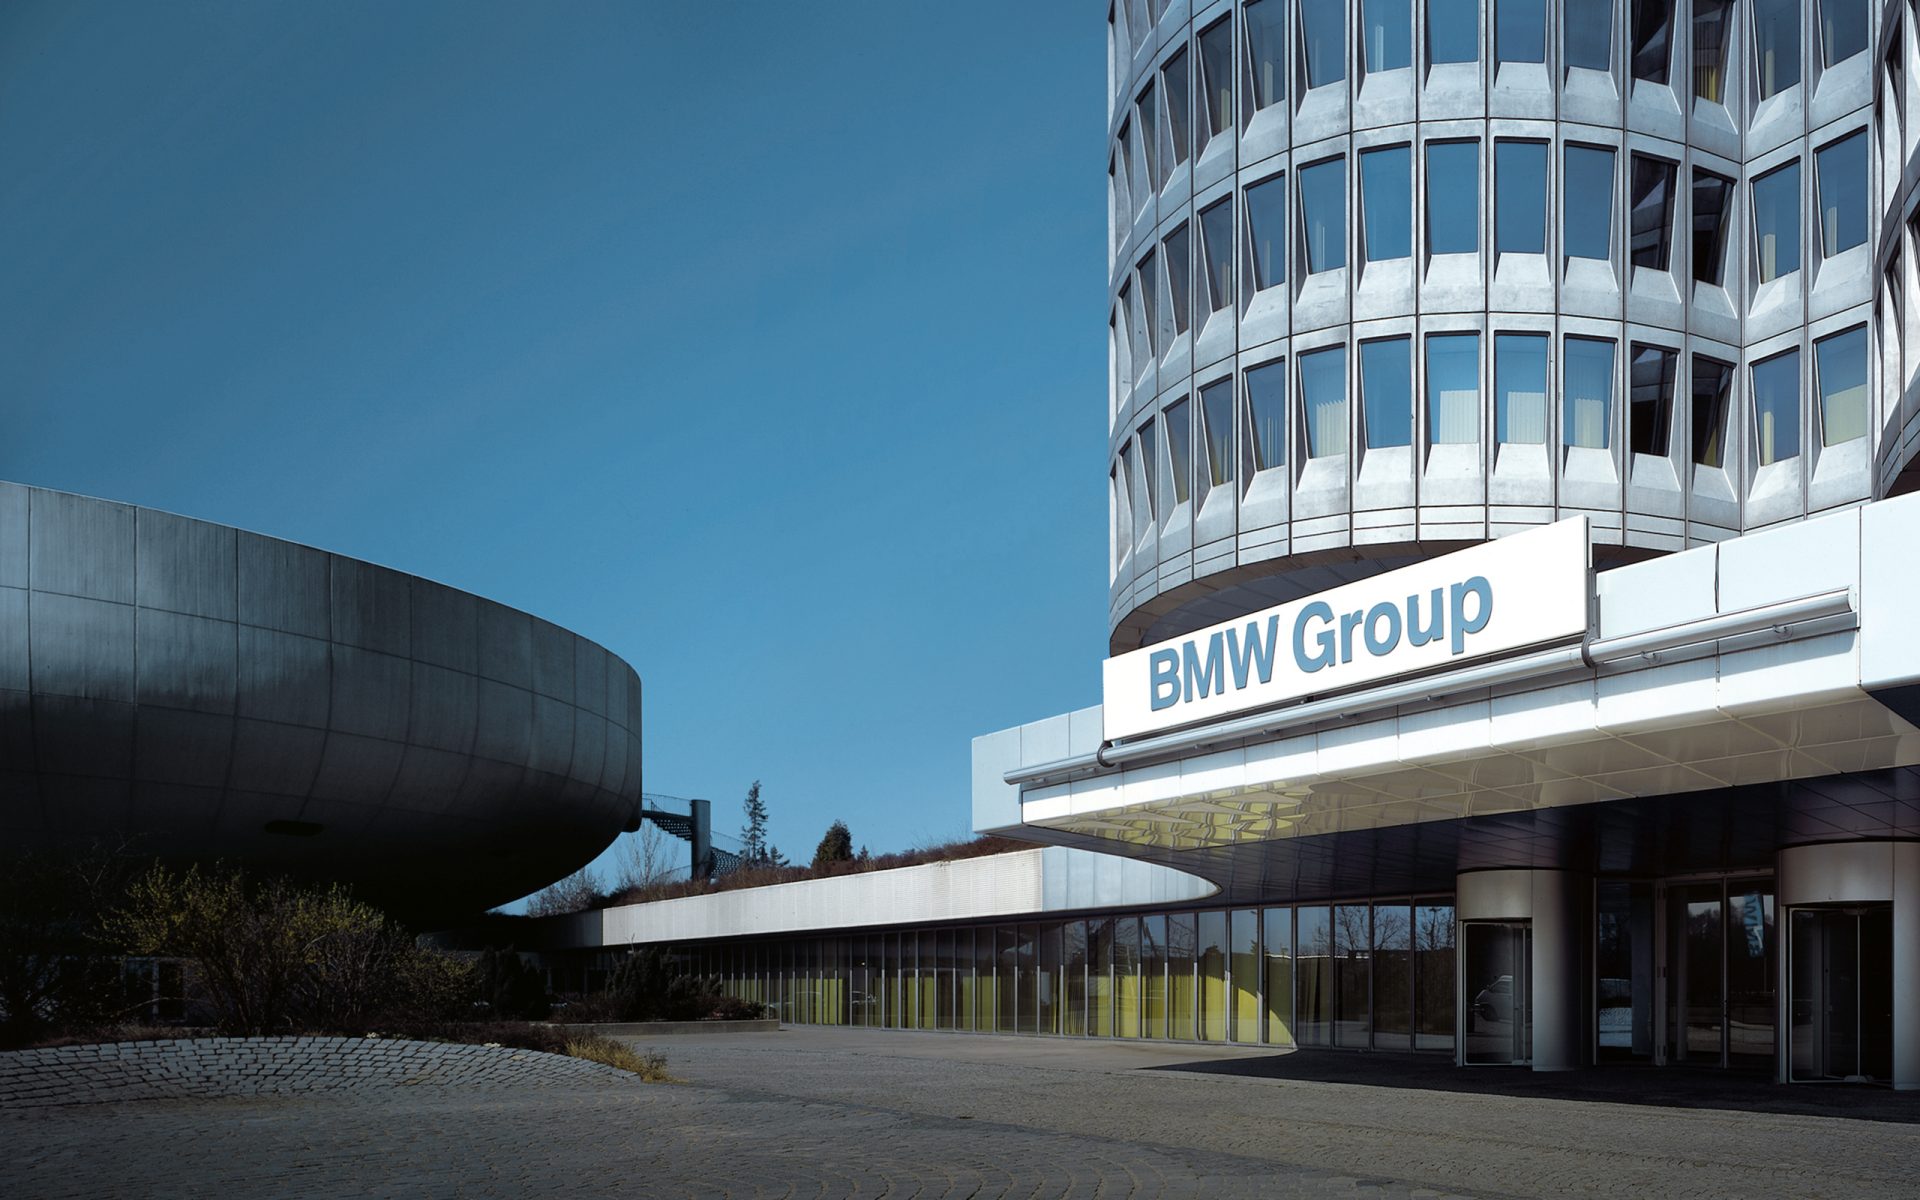 BMW Group realignment.